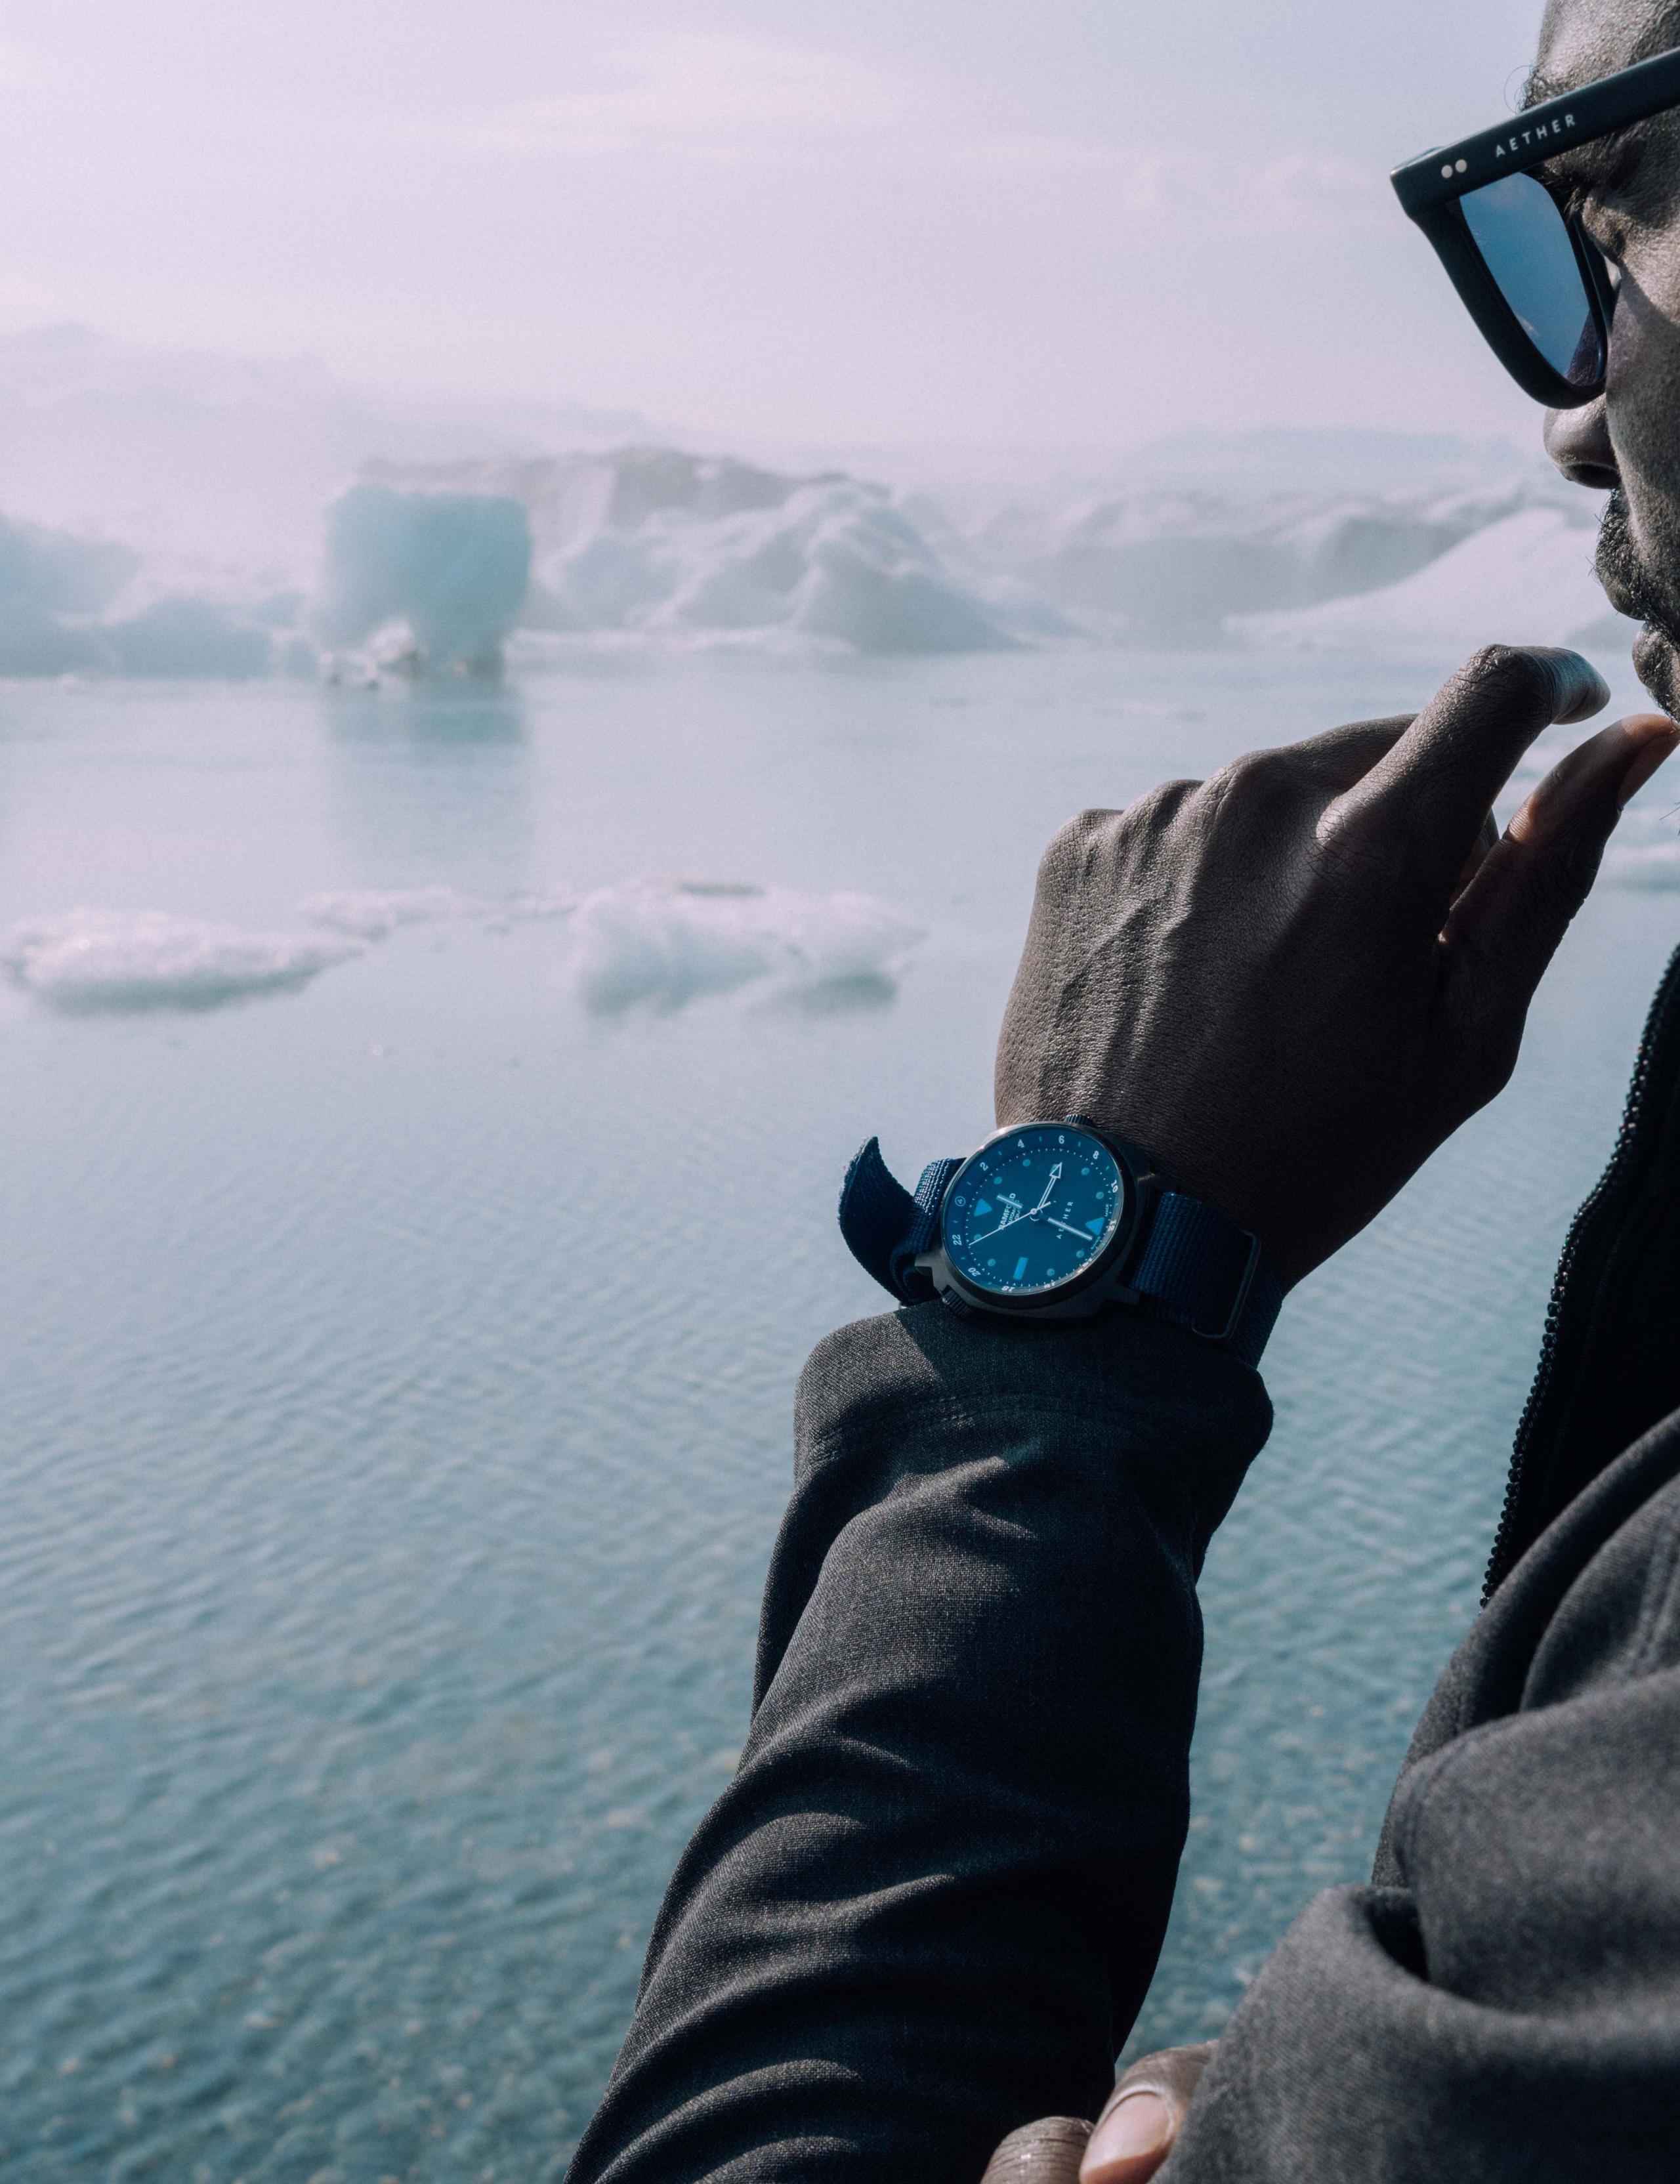 A guy checking his watch in Iceland